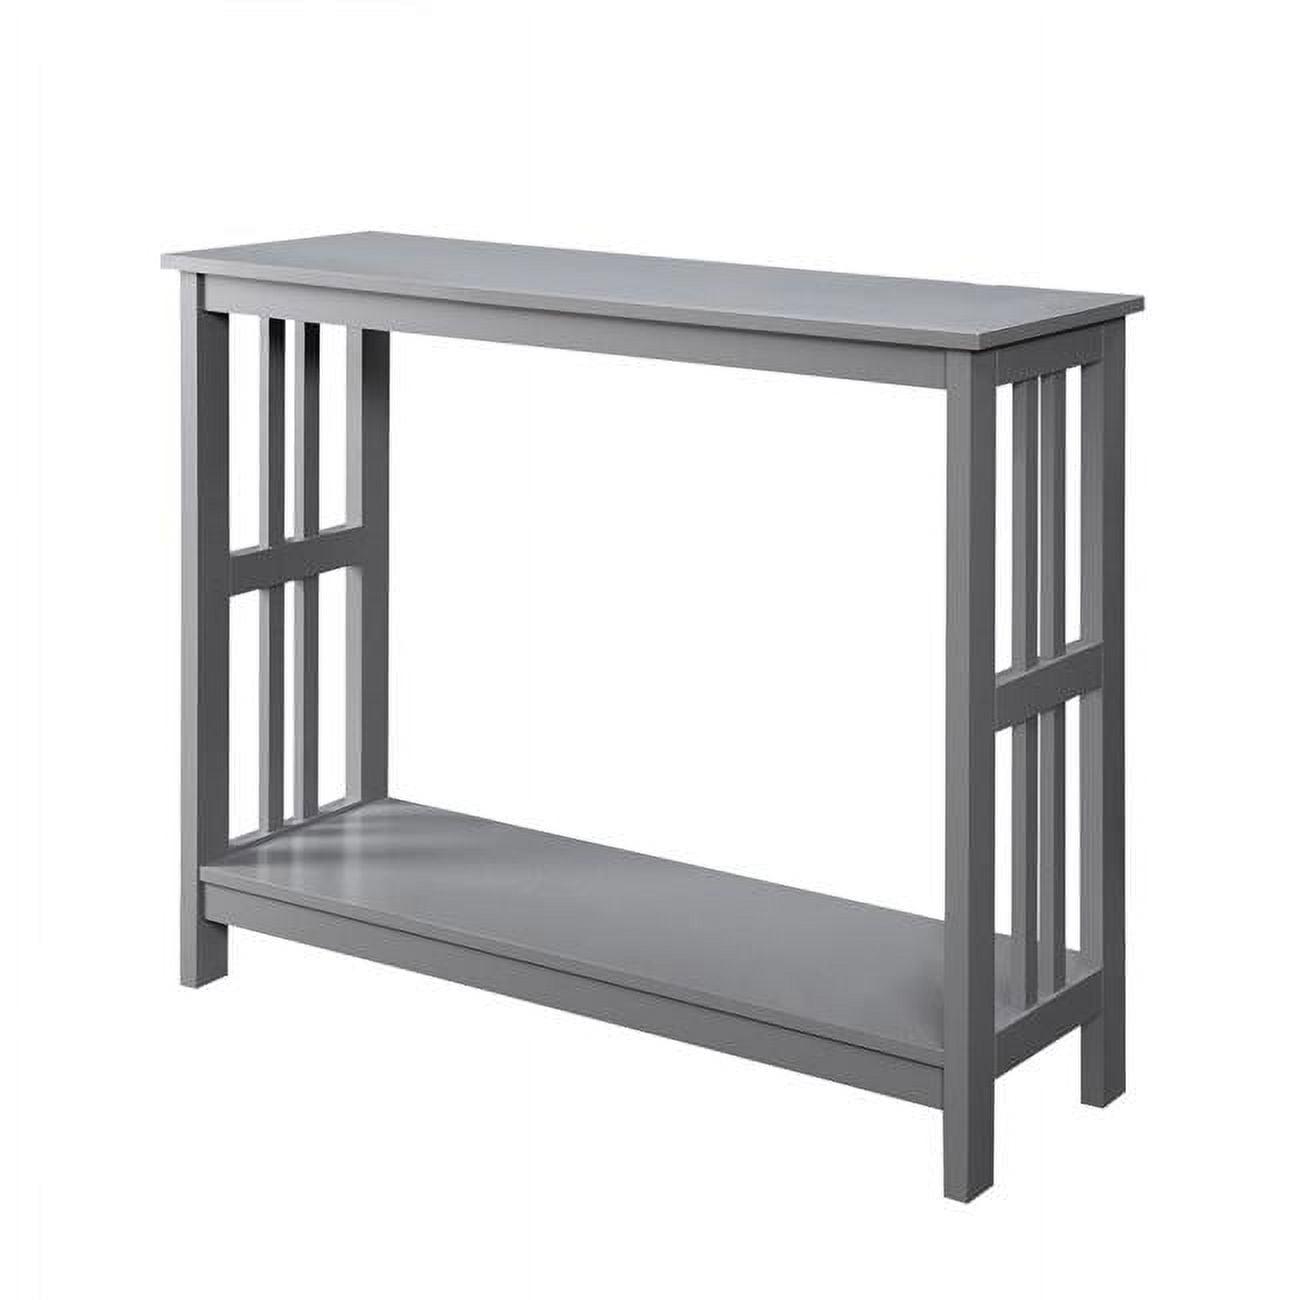 Elegant Gray Mission-Inspired Console Table with Glass Overlay and Storage Shelf